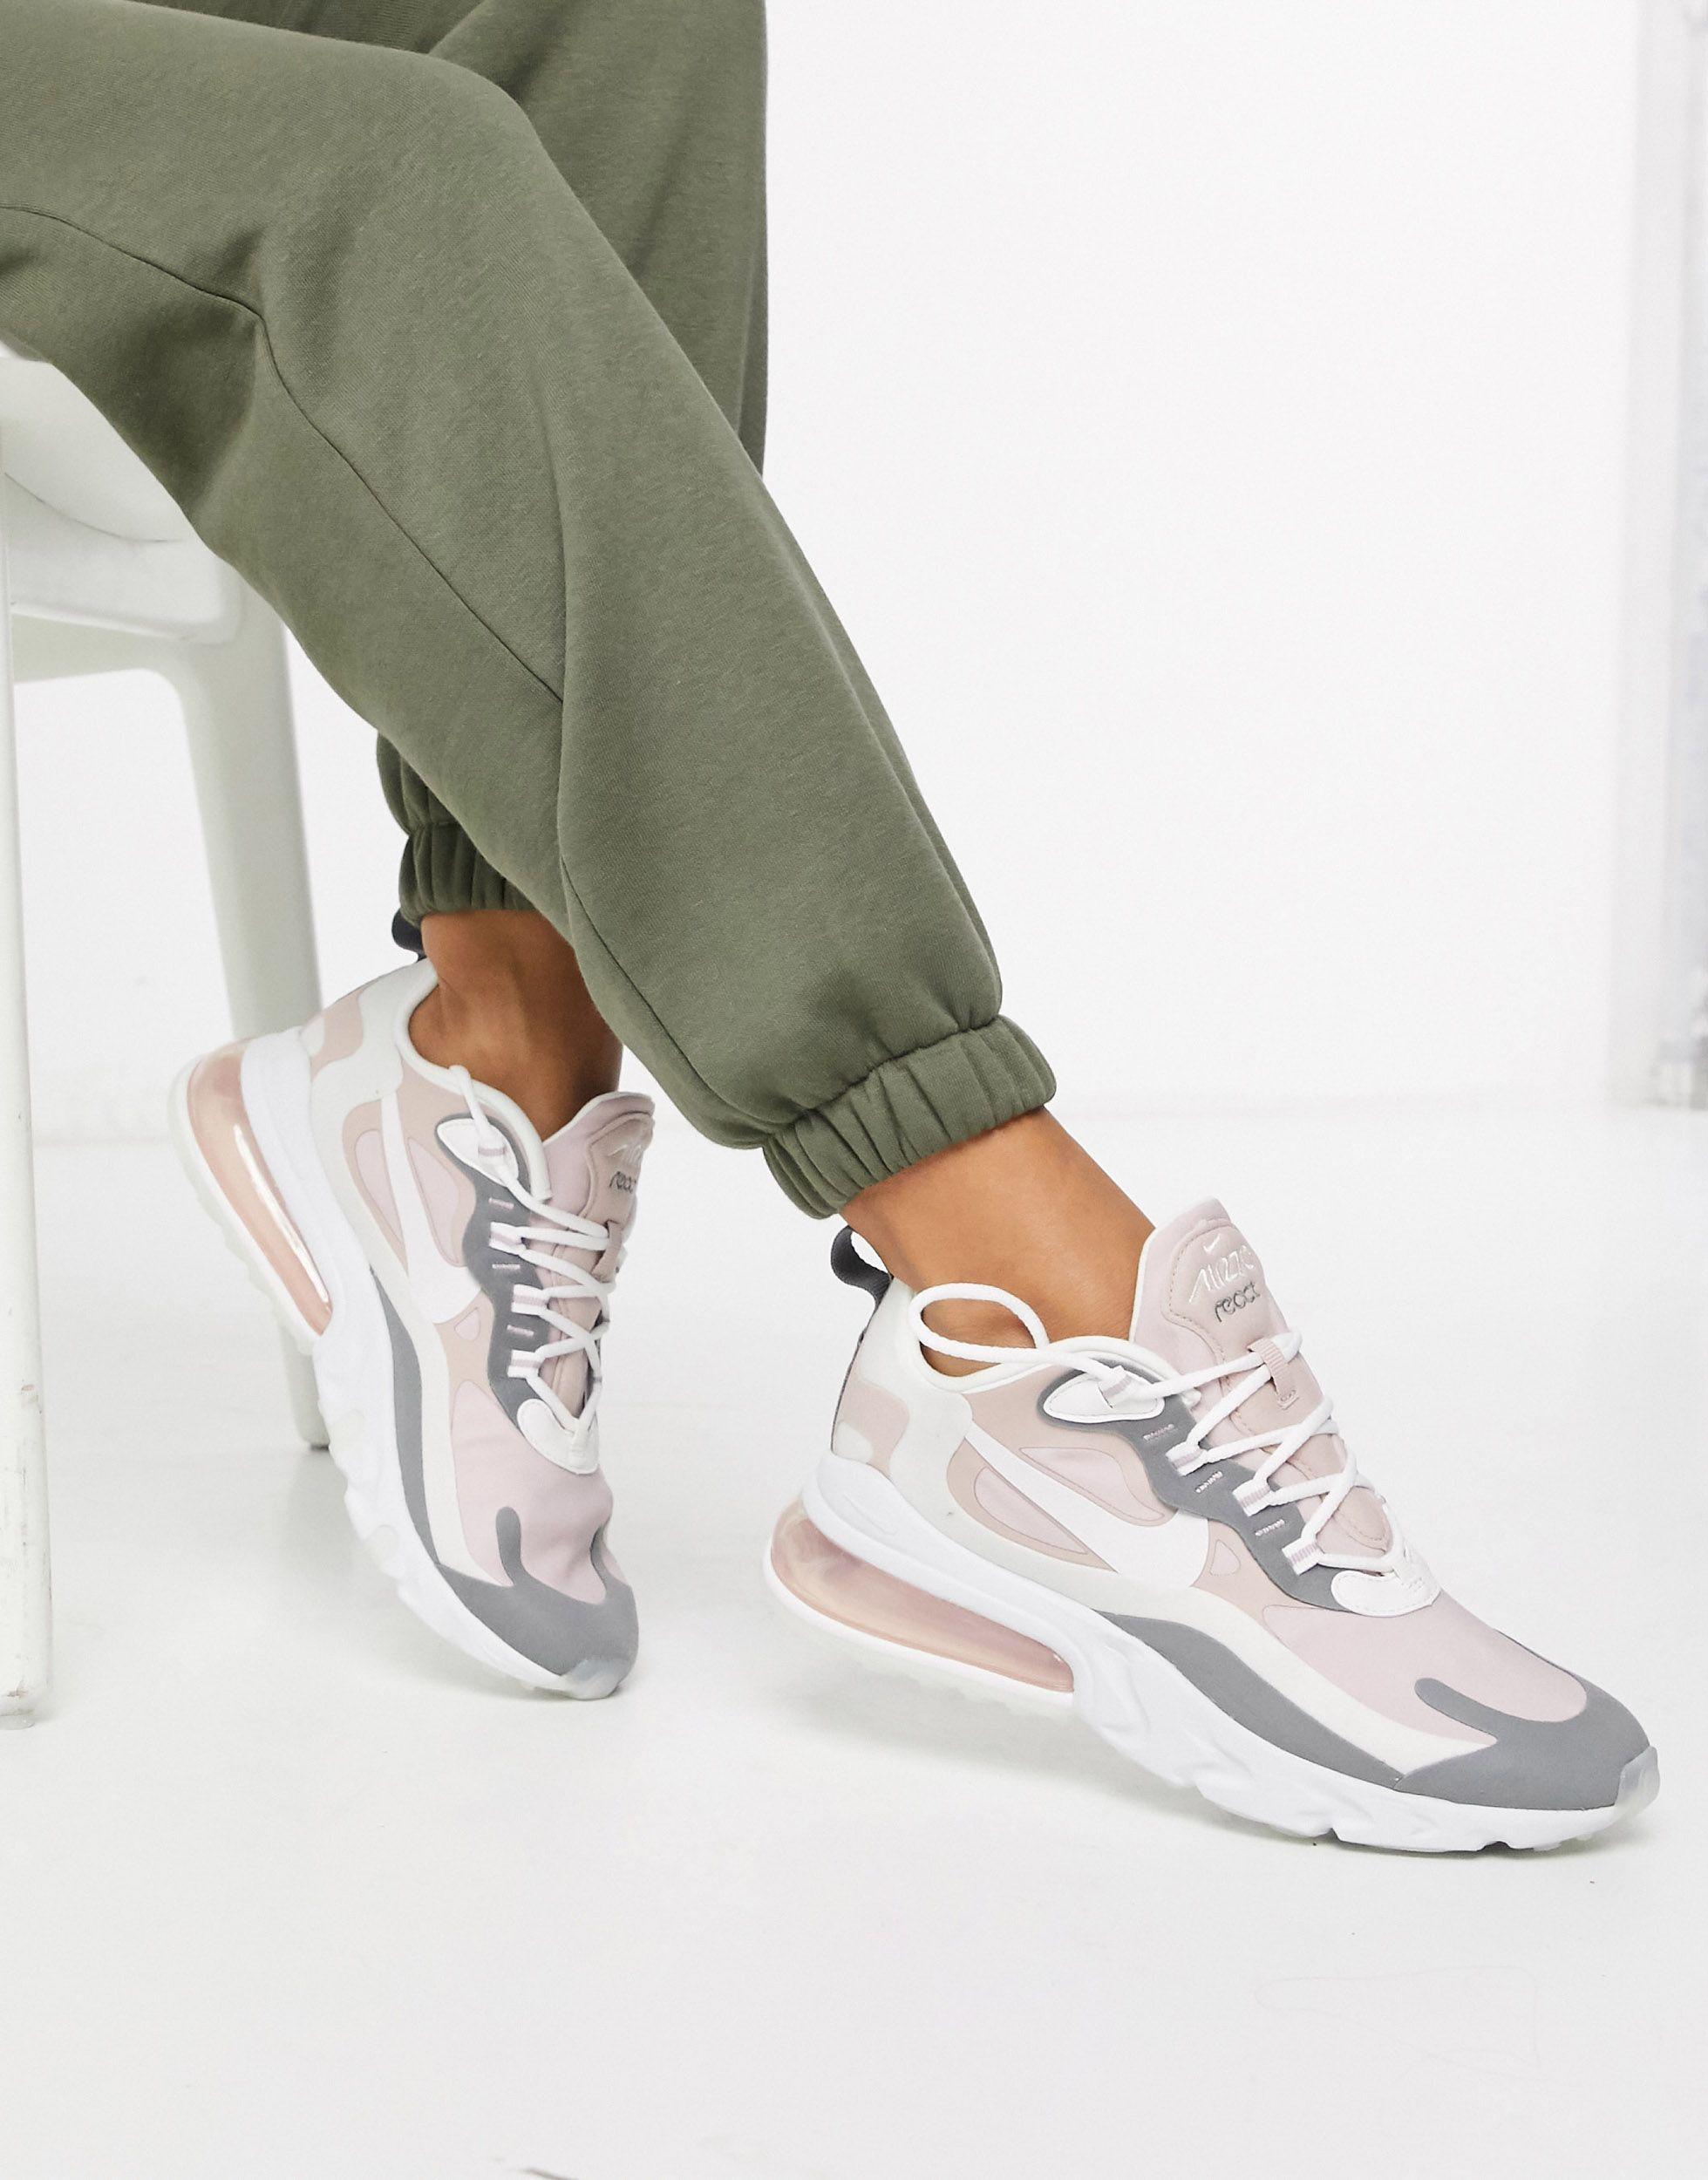 Nike Synthetic Air Max 270 React Trainers in Pink (Gray) | Lyst